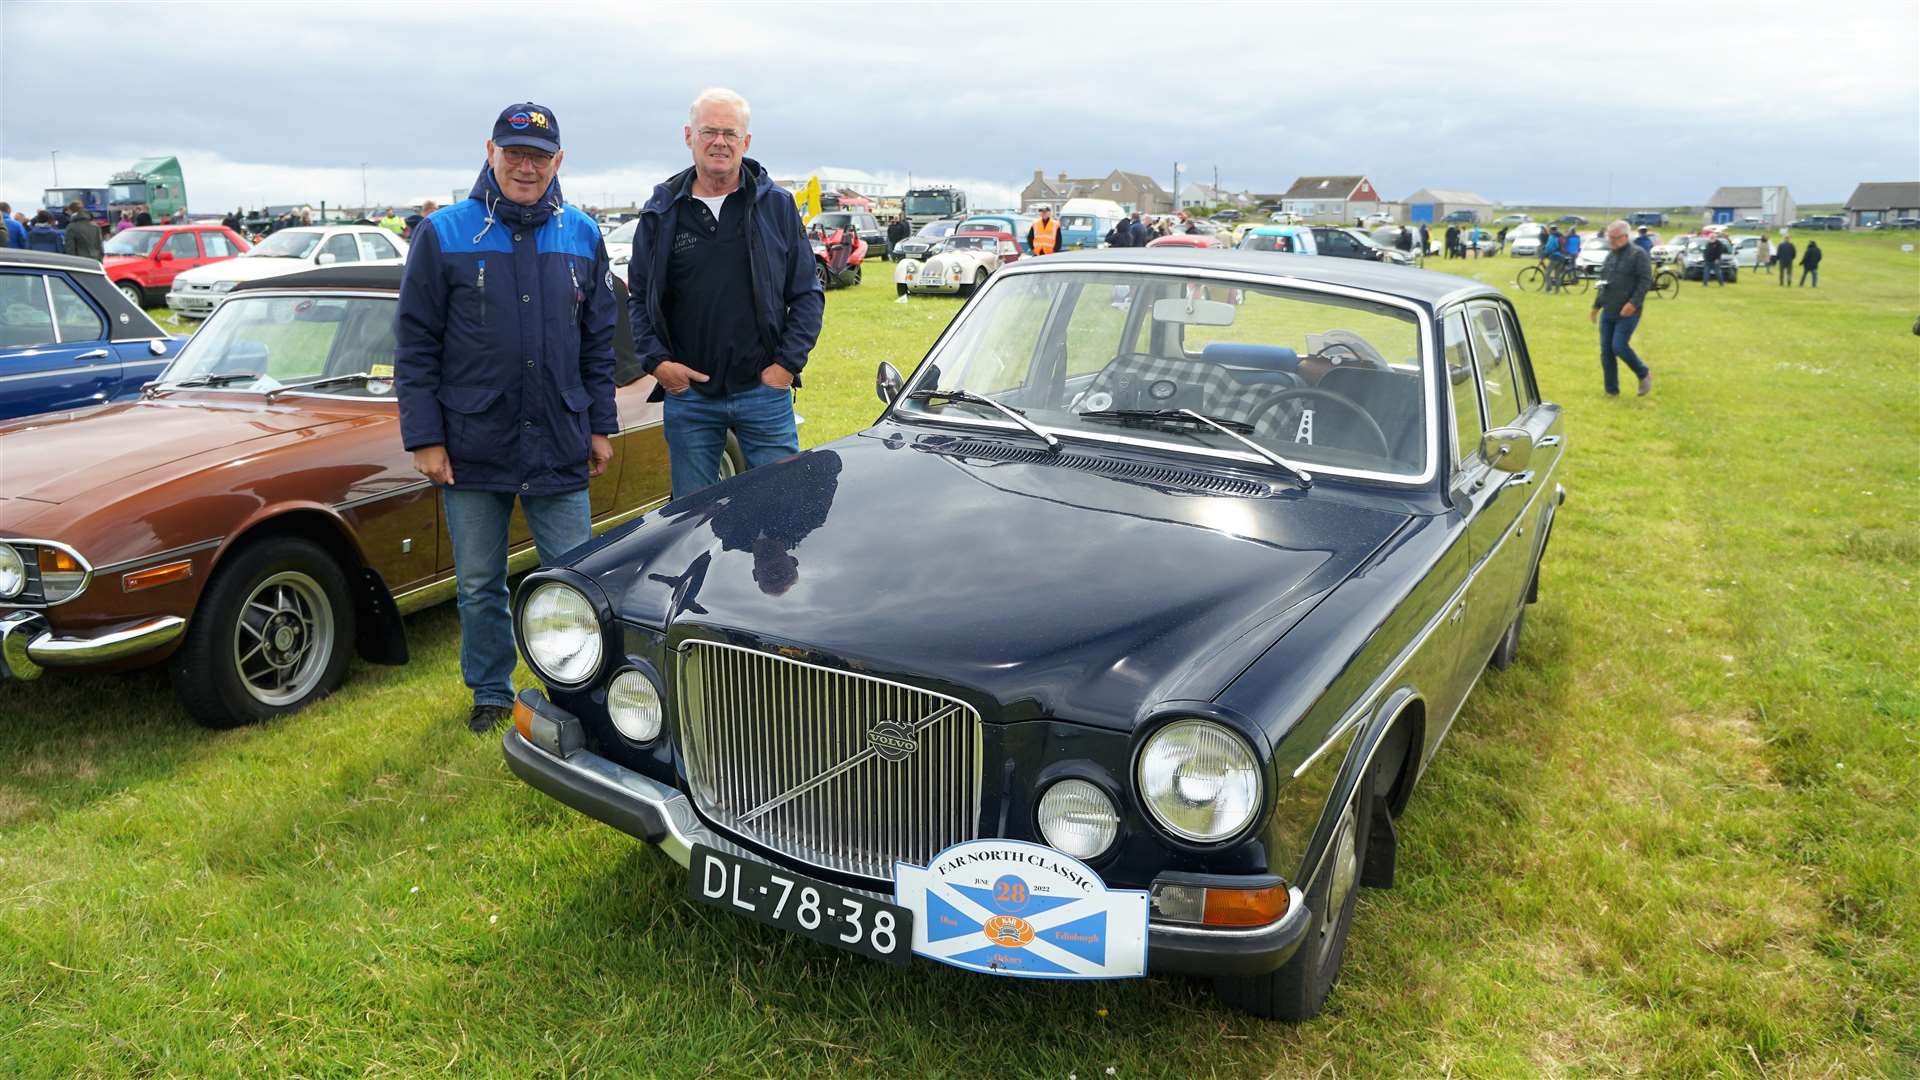 Car owner Kees van Dorth, left, and friend Jan were touring the Highlands when they came across the rally by chance. Their classic six-cyclinder Volvo dates from 1969 and had come all the way from Amsterdam. Picture: DGS